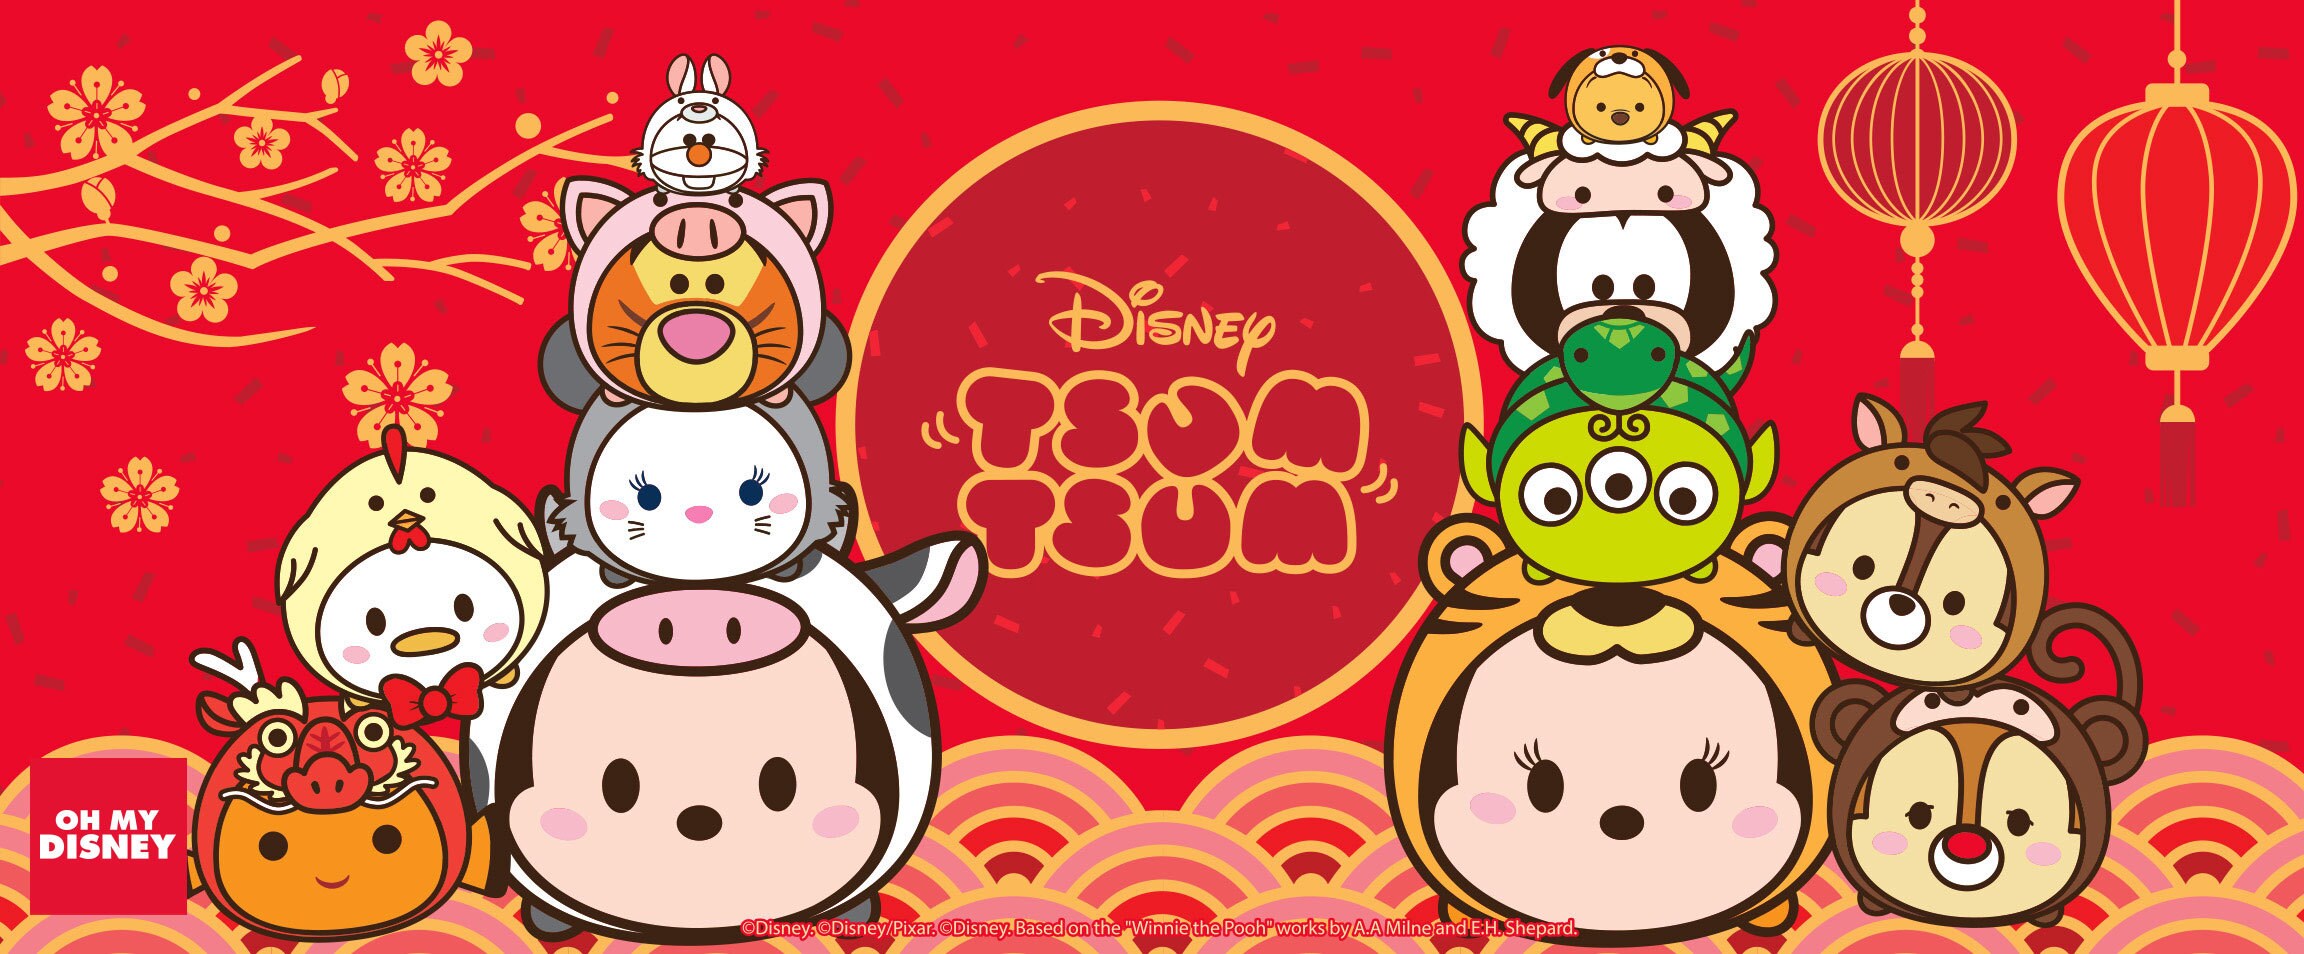 Ring In The Year of the Cow With The Adorable Tsum Tsum Zodiac Collection!  | Disney Singapore